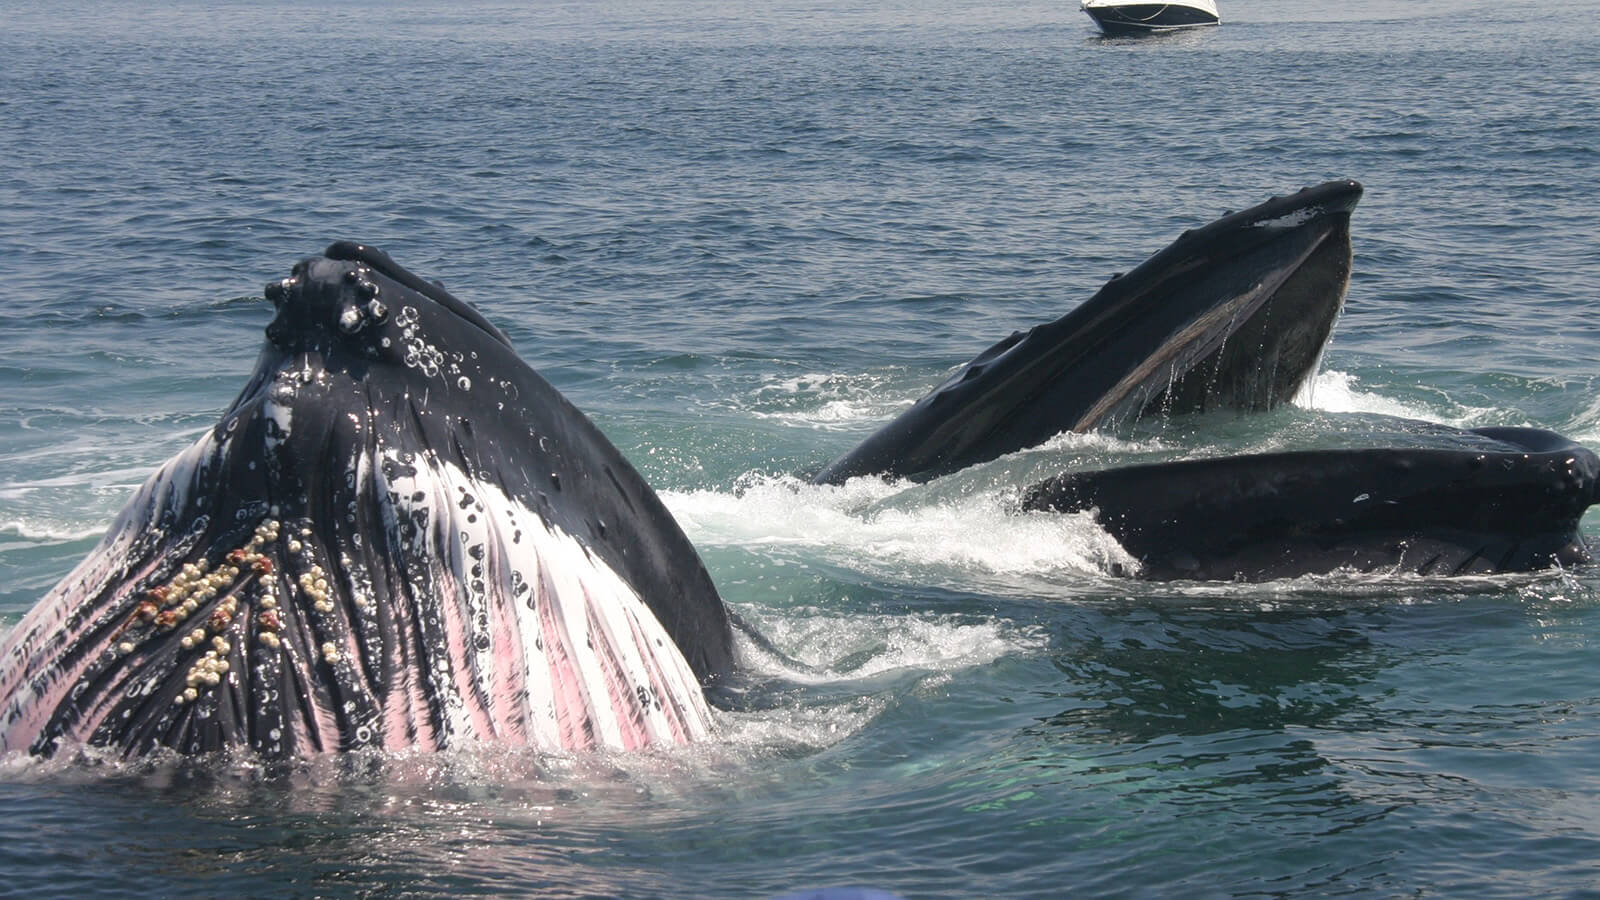 two whales feed at the water's surface